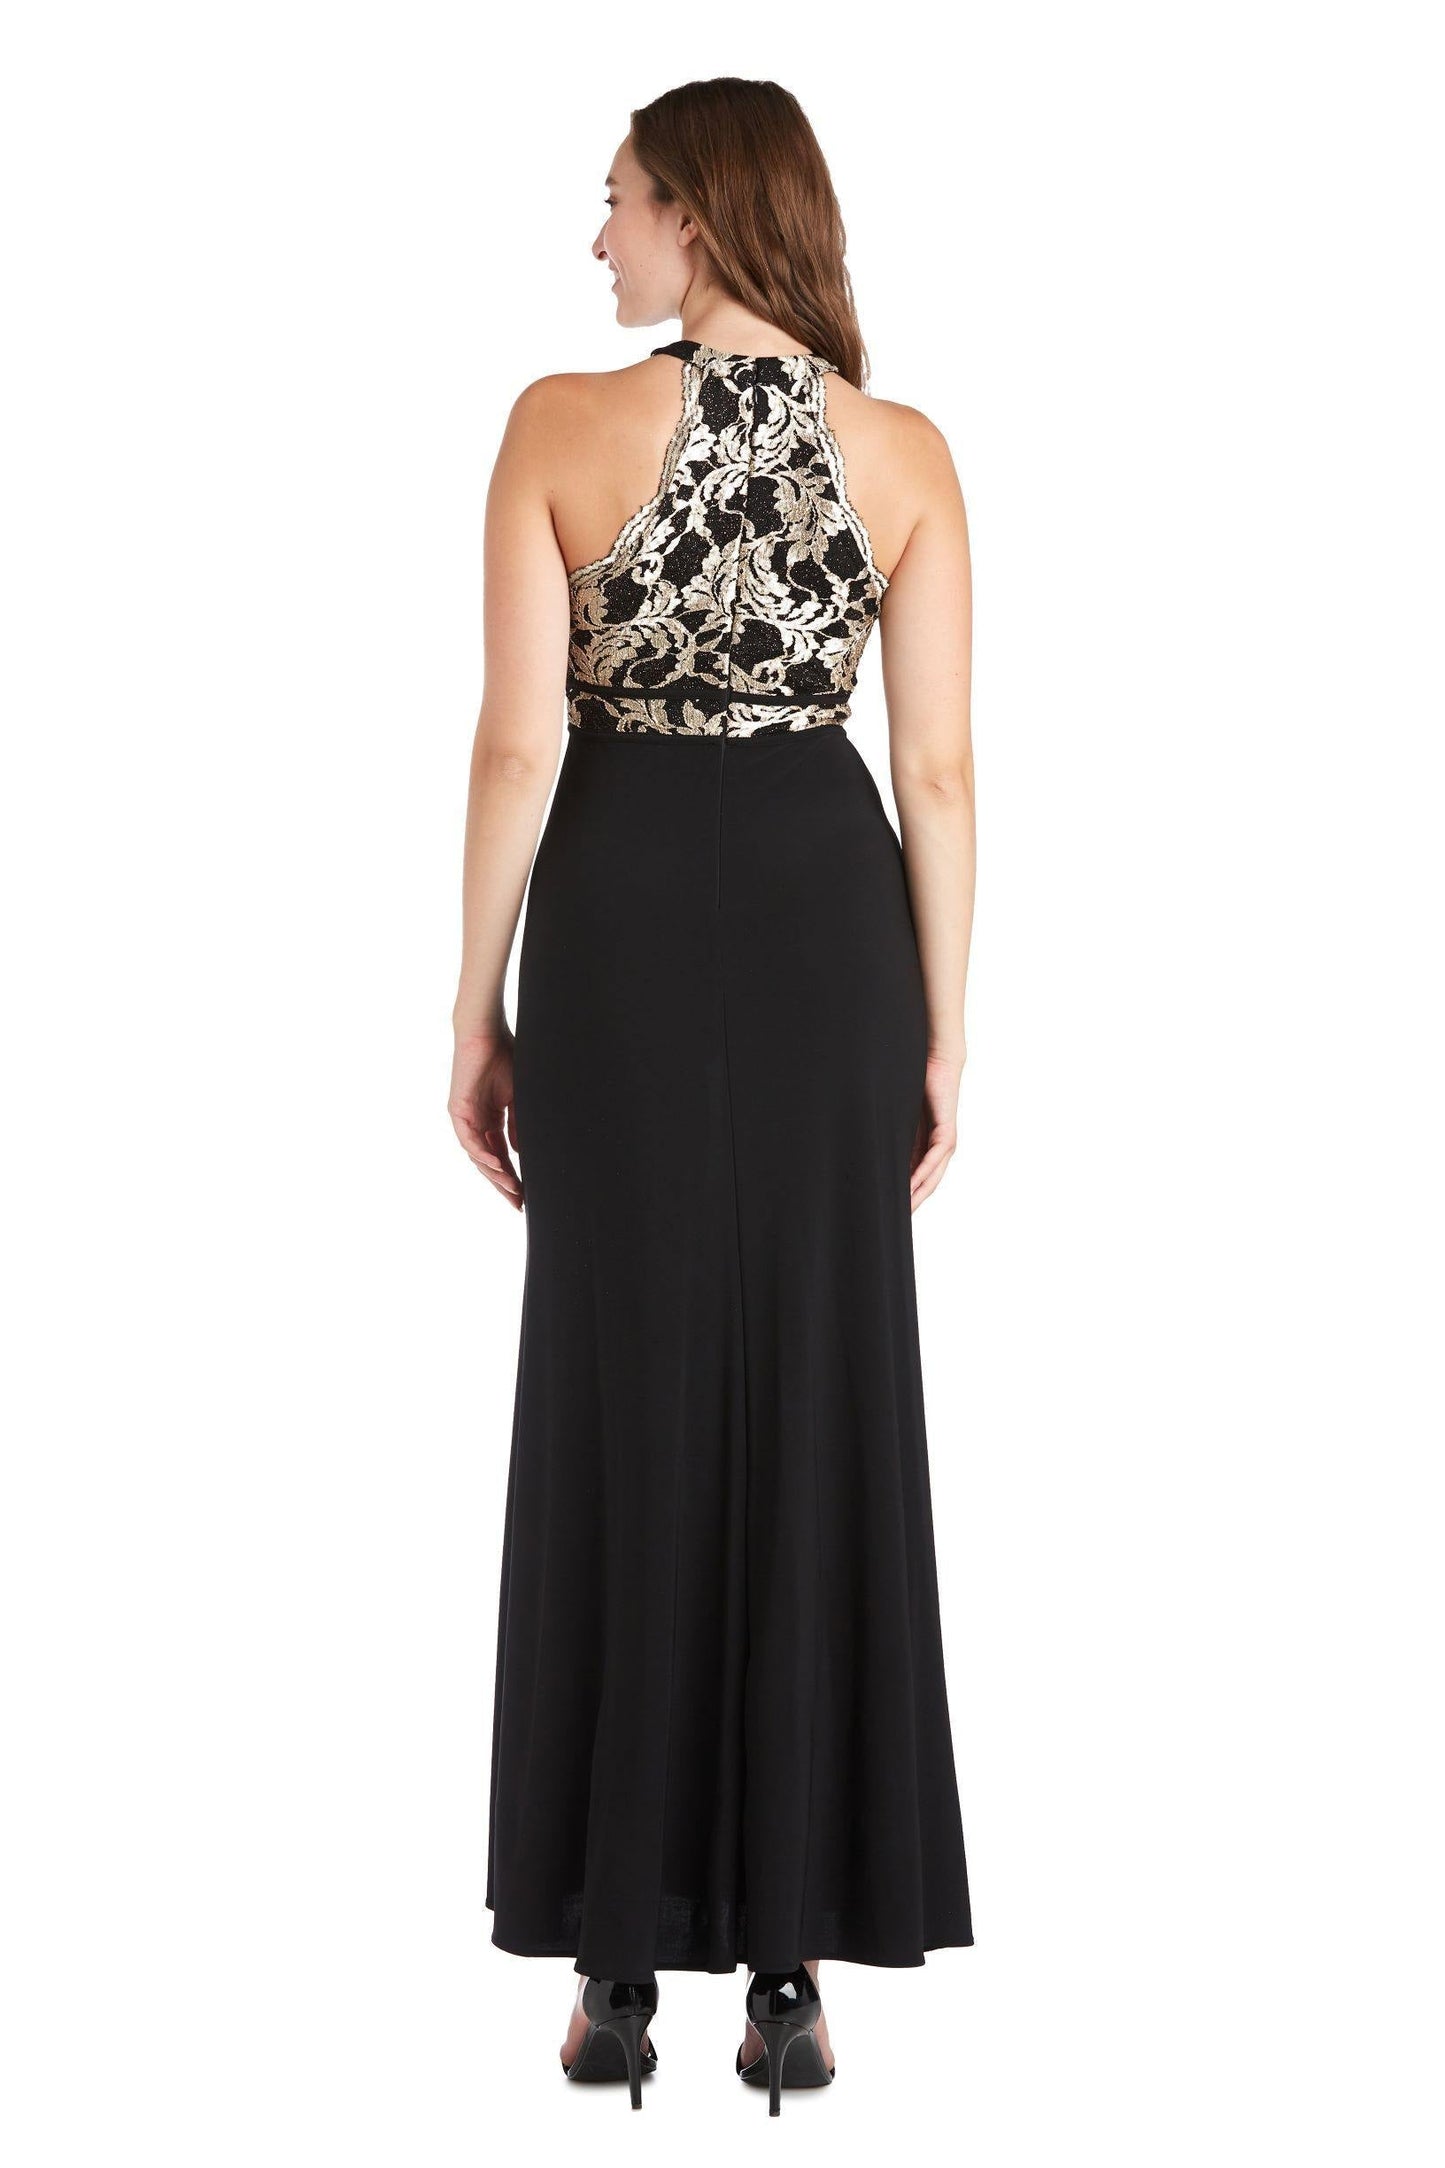 Morgan & Co Formal Scallop Lace Long Dress 12444 - The Dress Outlet